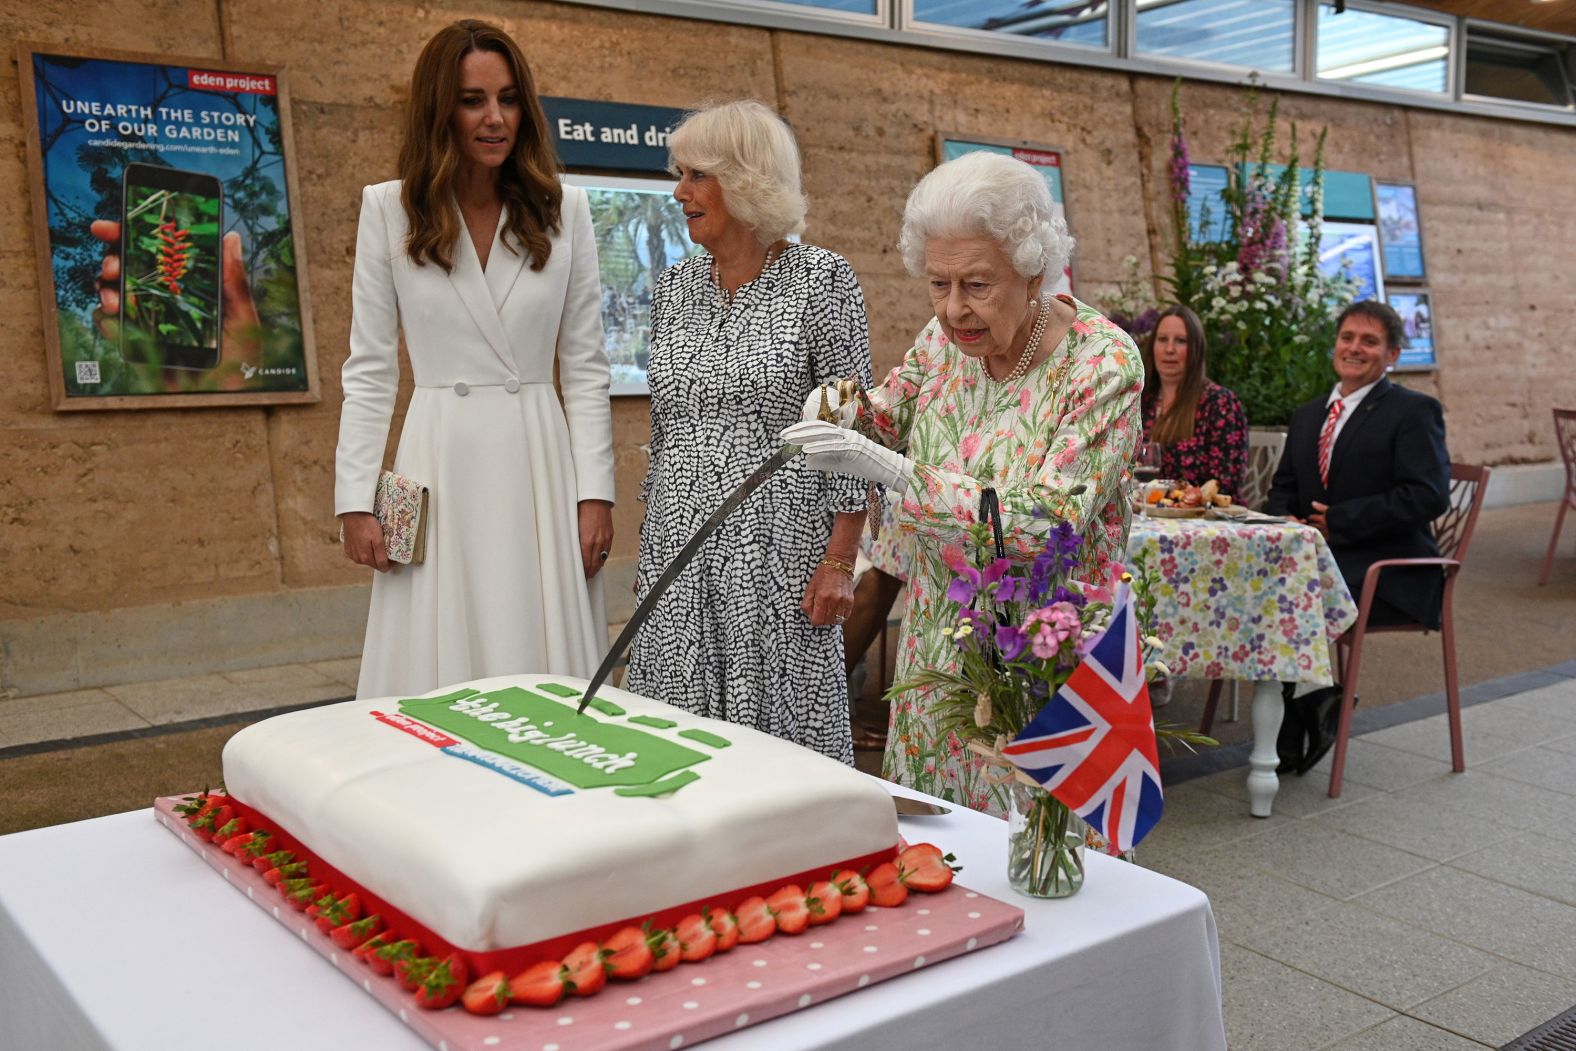 Kate and Camilla watch as Queen Elizabeth II uses a sword to cut a cake at a charity event in St. Austell, England, in 2021.